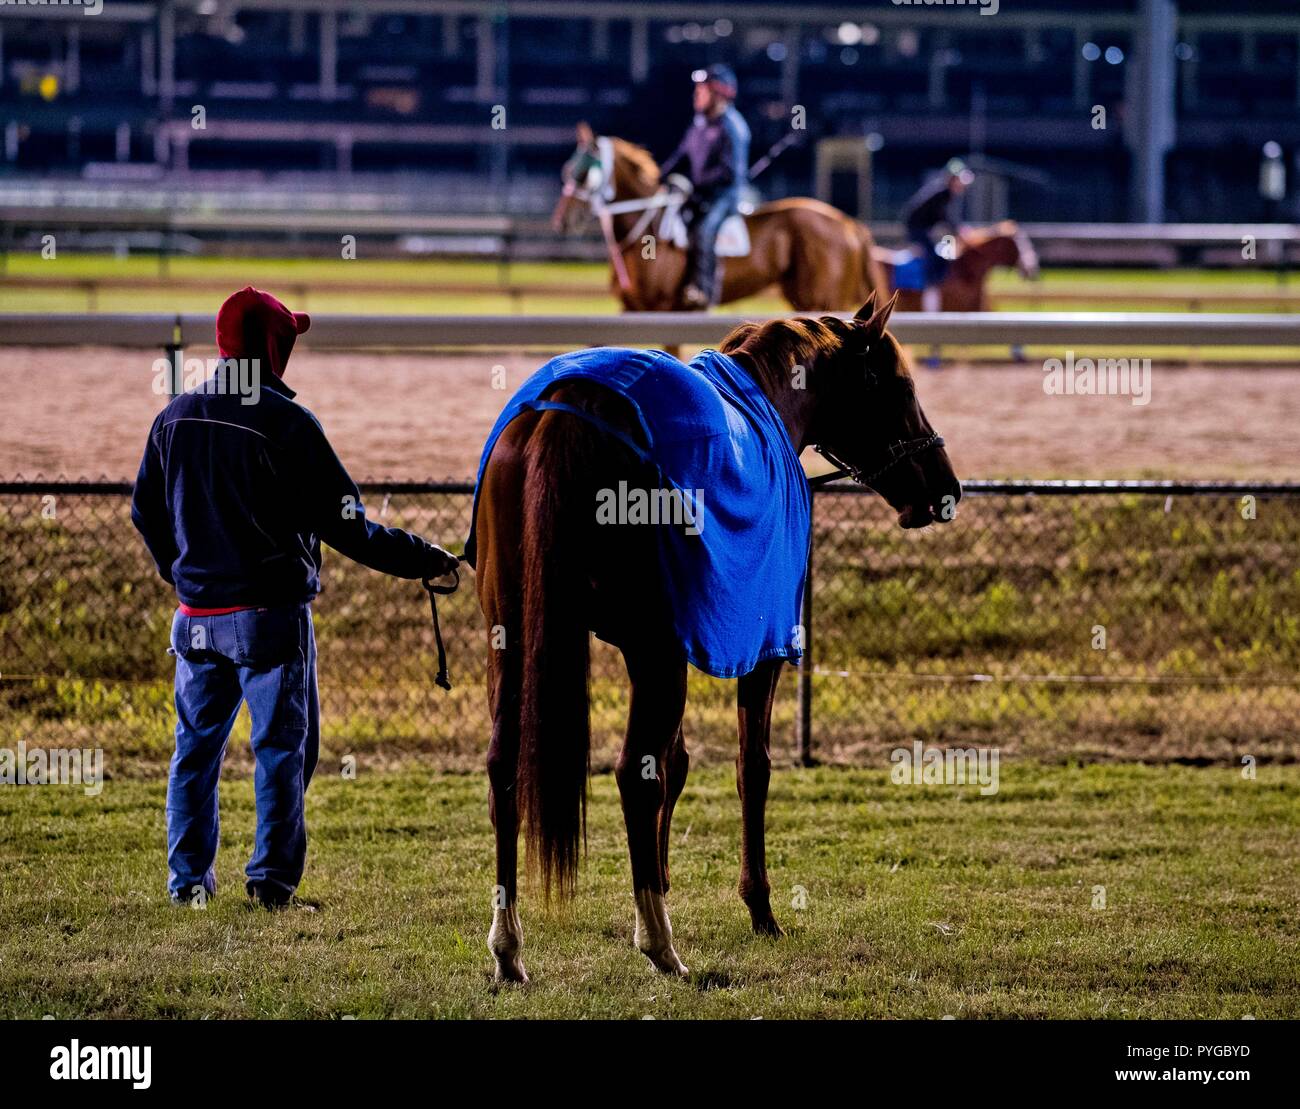 Louisville, Kentucky, USA. 25th Oct, 2018. Mind Your Biscuits, trained by Chad Summers, grazes by the track and checks out the competition at Churchill Downs. Credit: csm/Alamy Live News Stock Photo